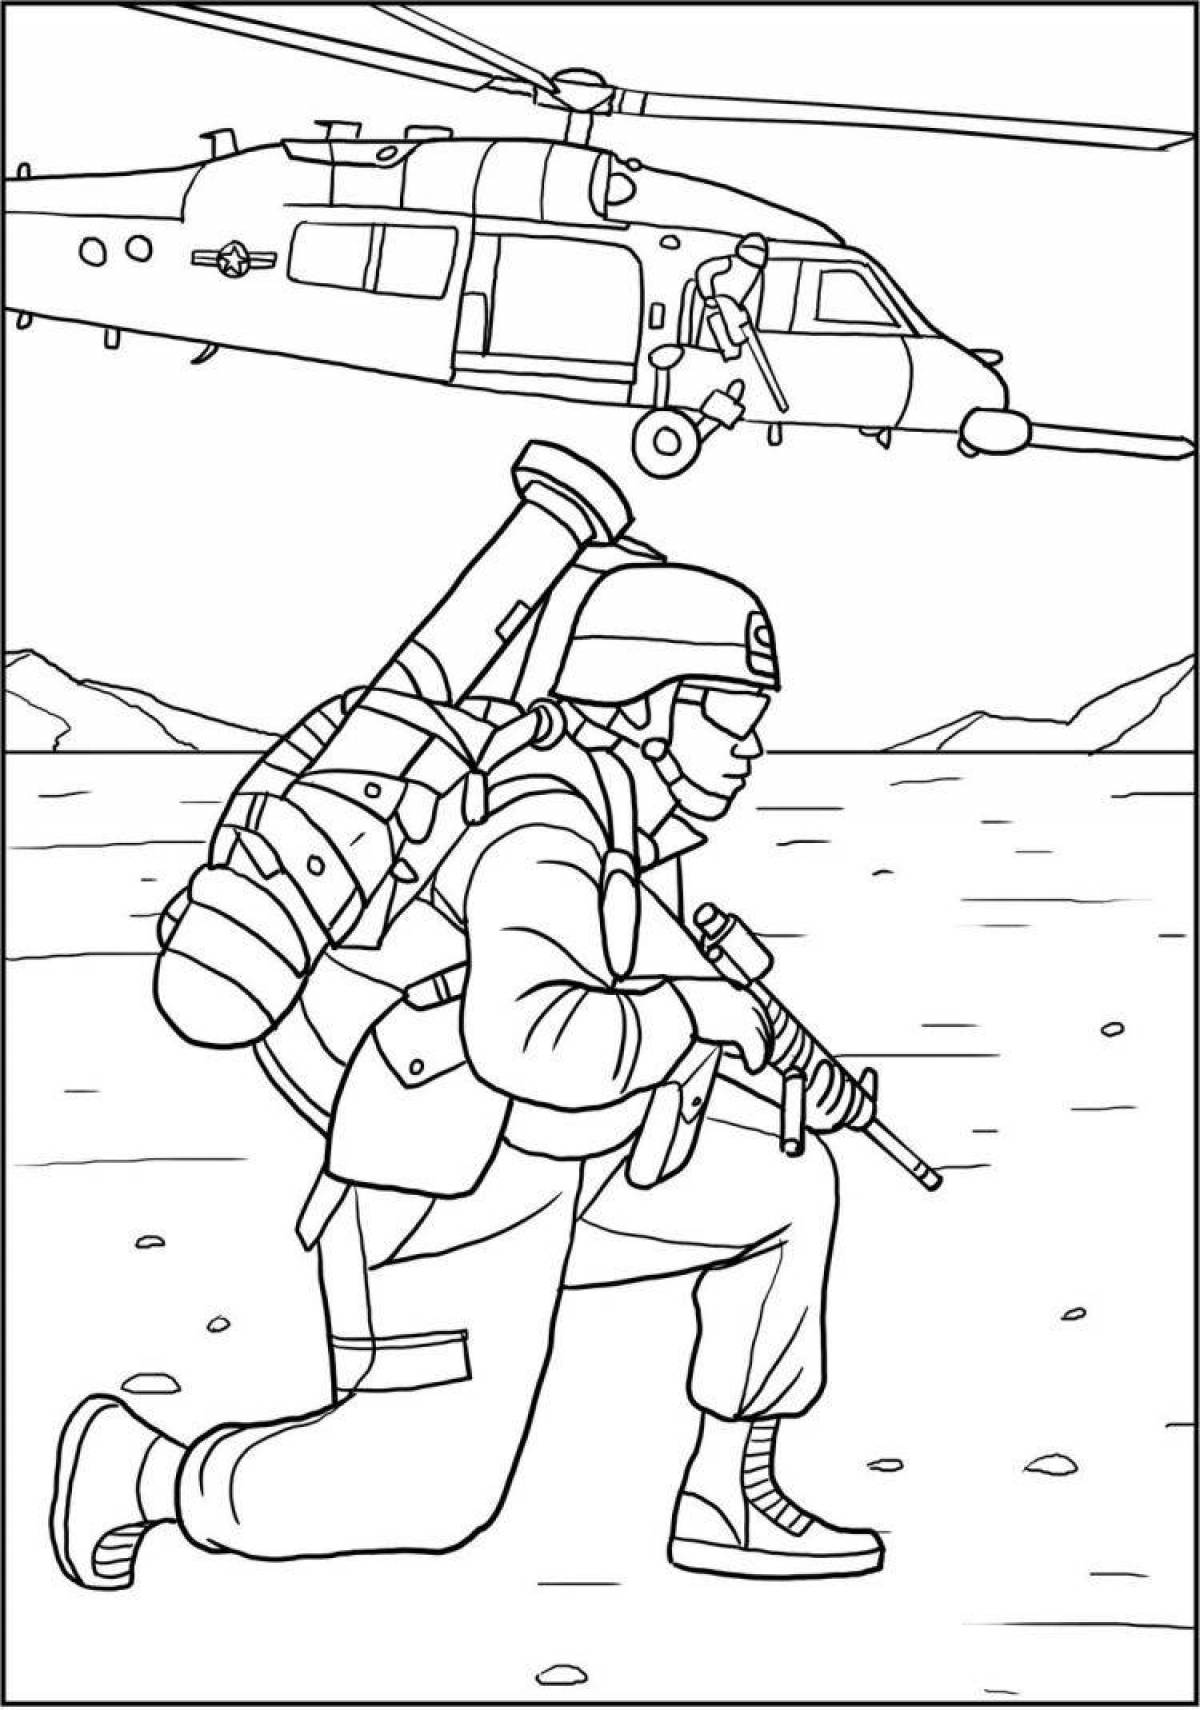 Gorgeous soldier hero coloring page